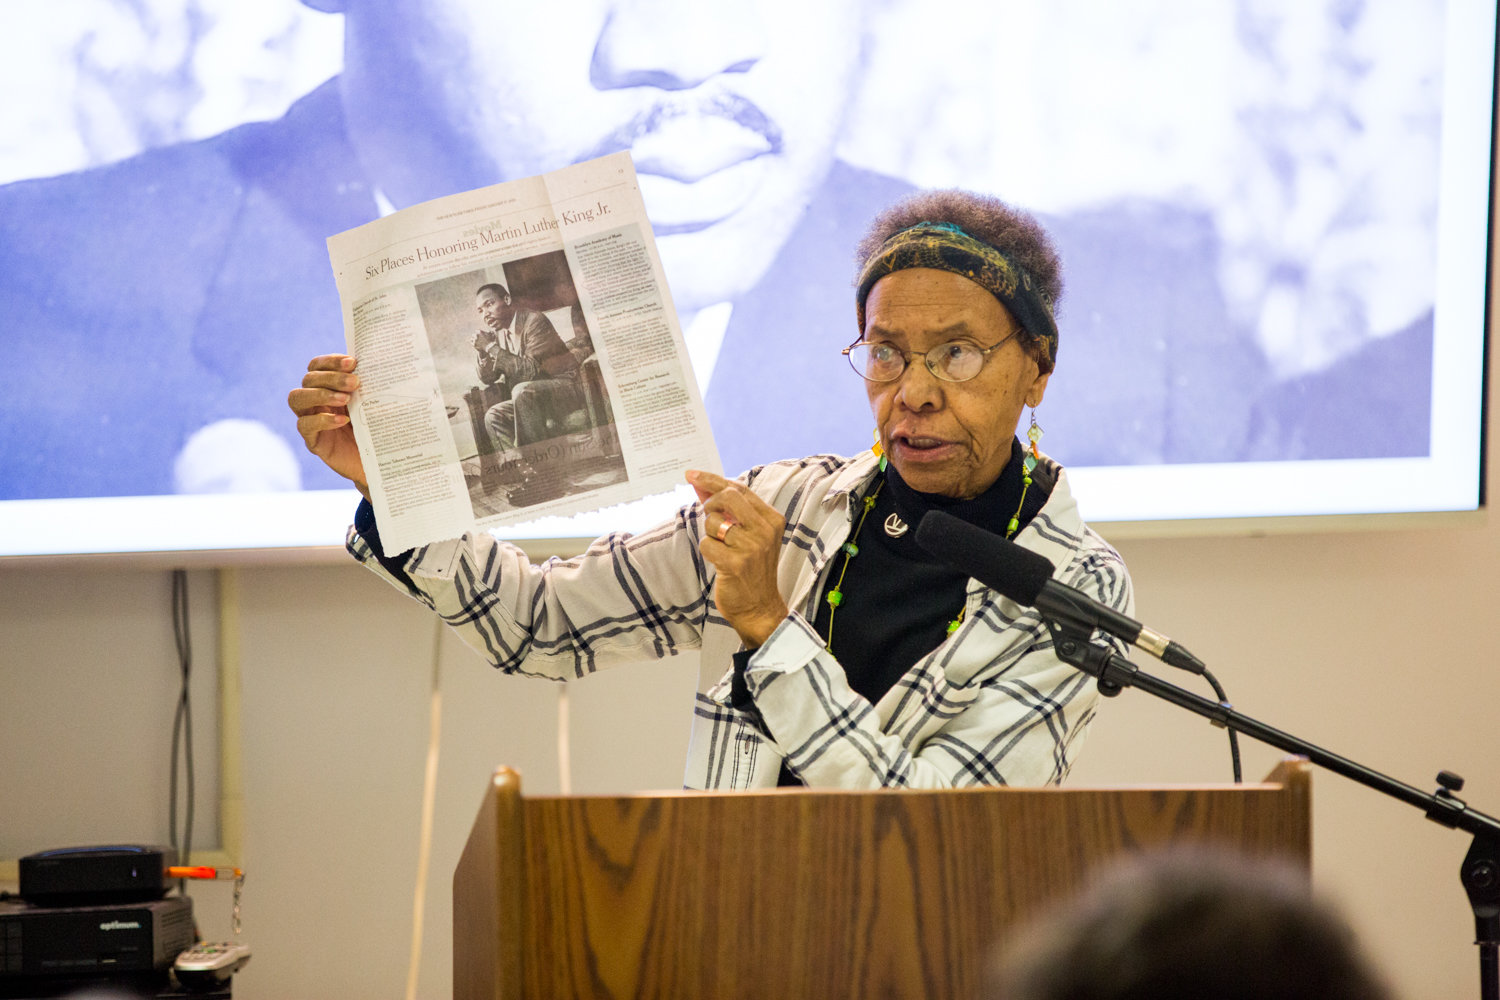 Ernece Kelly holds up a newspaper story about Dr. Martin Luther King Jr., during a presentation last week at RSS-Riverdale Senior Services. Kelly worked for King in Chicago.